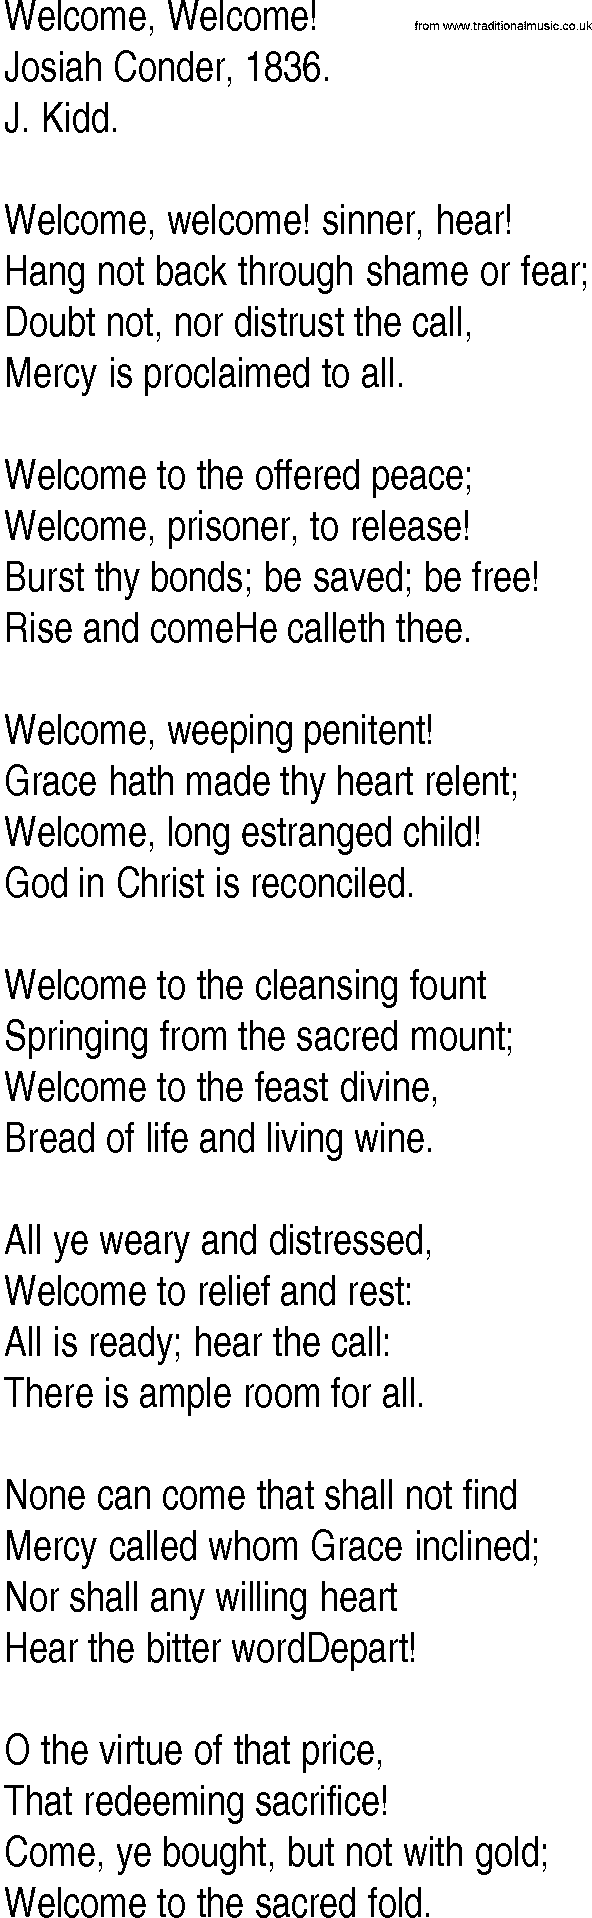 Hymn and Gospel Song: Welcome, Welcome! by Josiah Conder lyrics